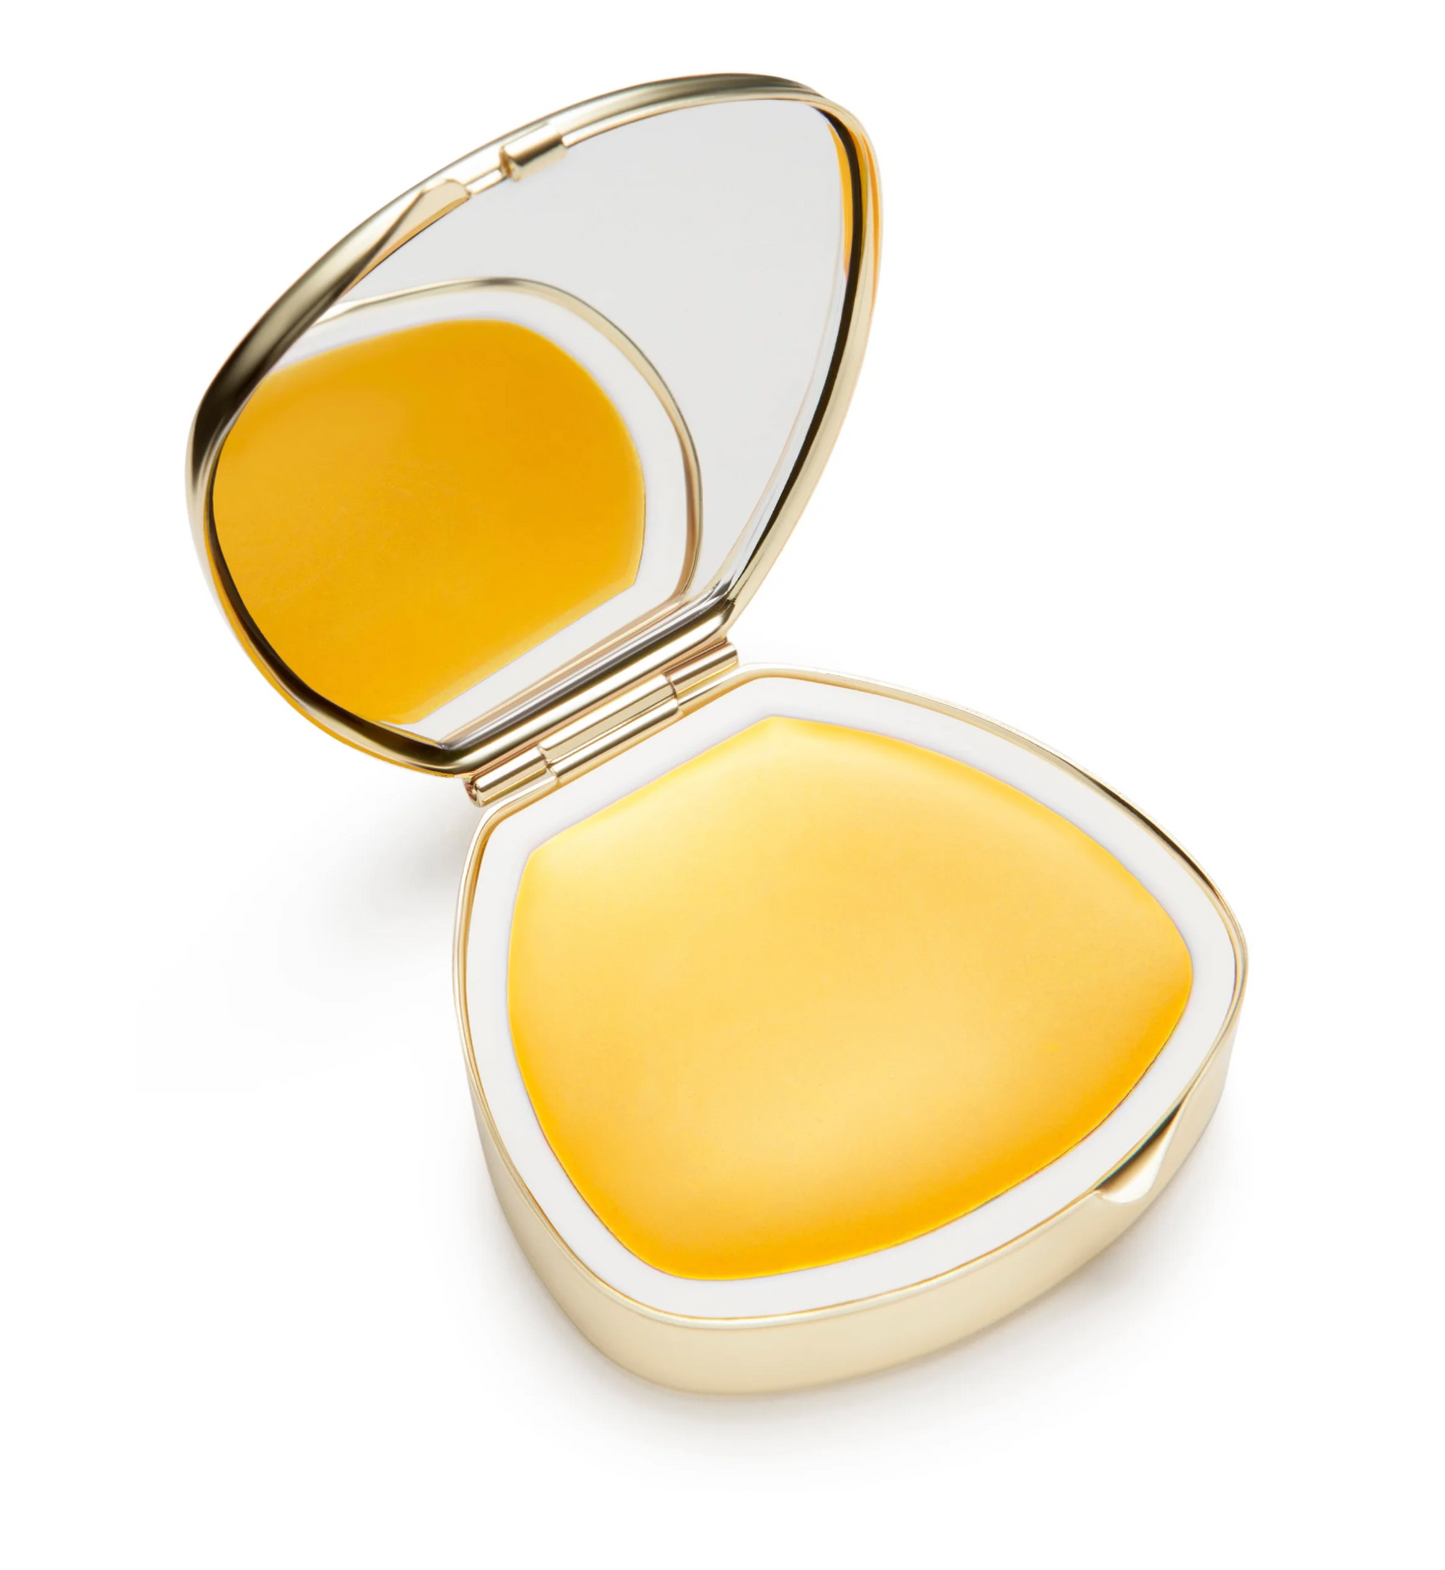 Oops a daisy Skiing Flapper - Lip Balm Compact